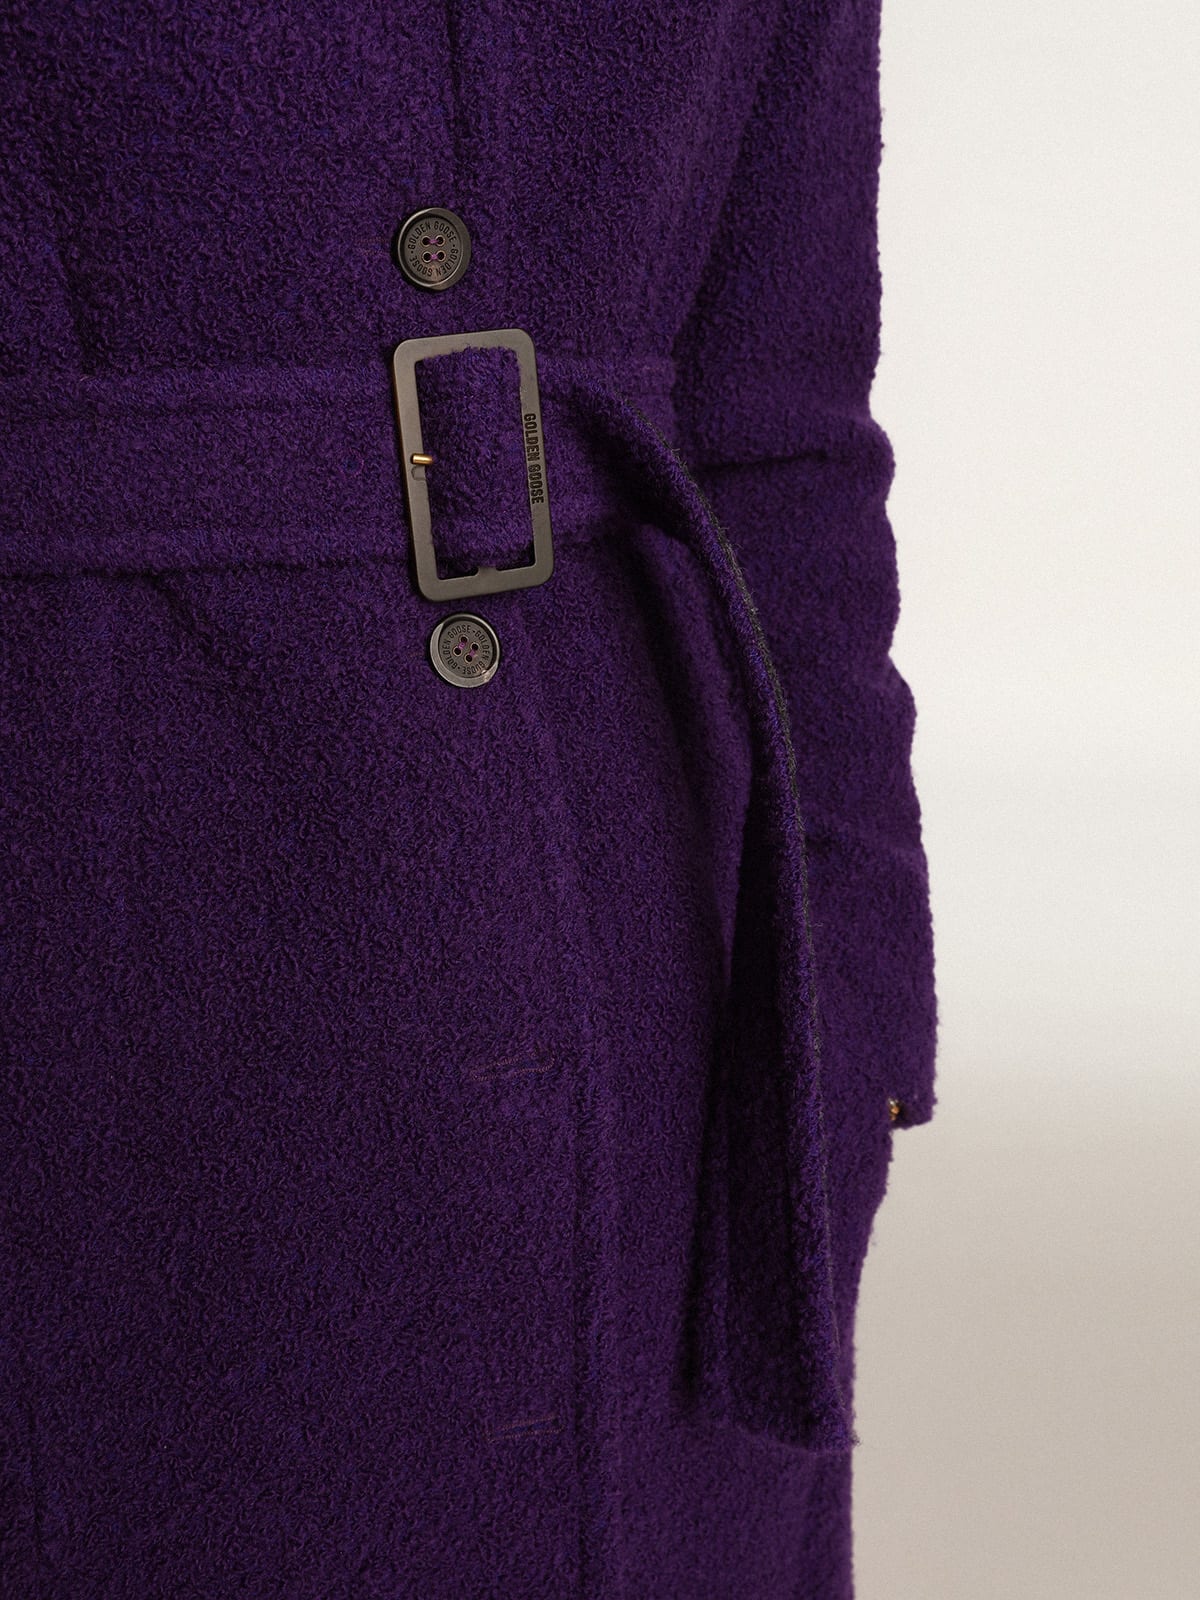 Golden Goose - Journey Collection coat in indigo purple wool with inner lining in drawn print in 